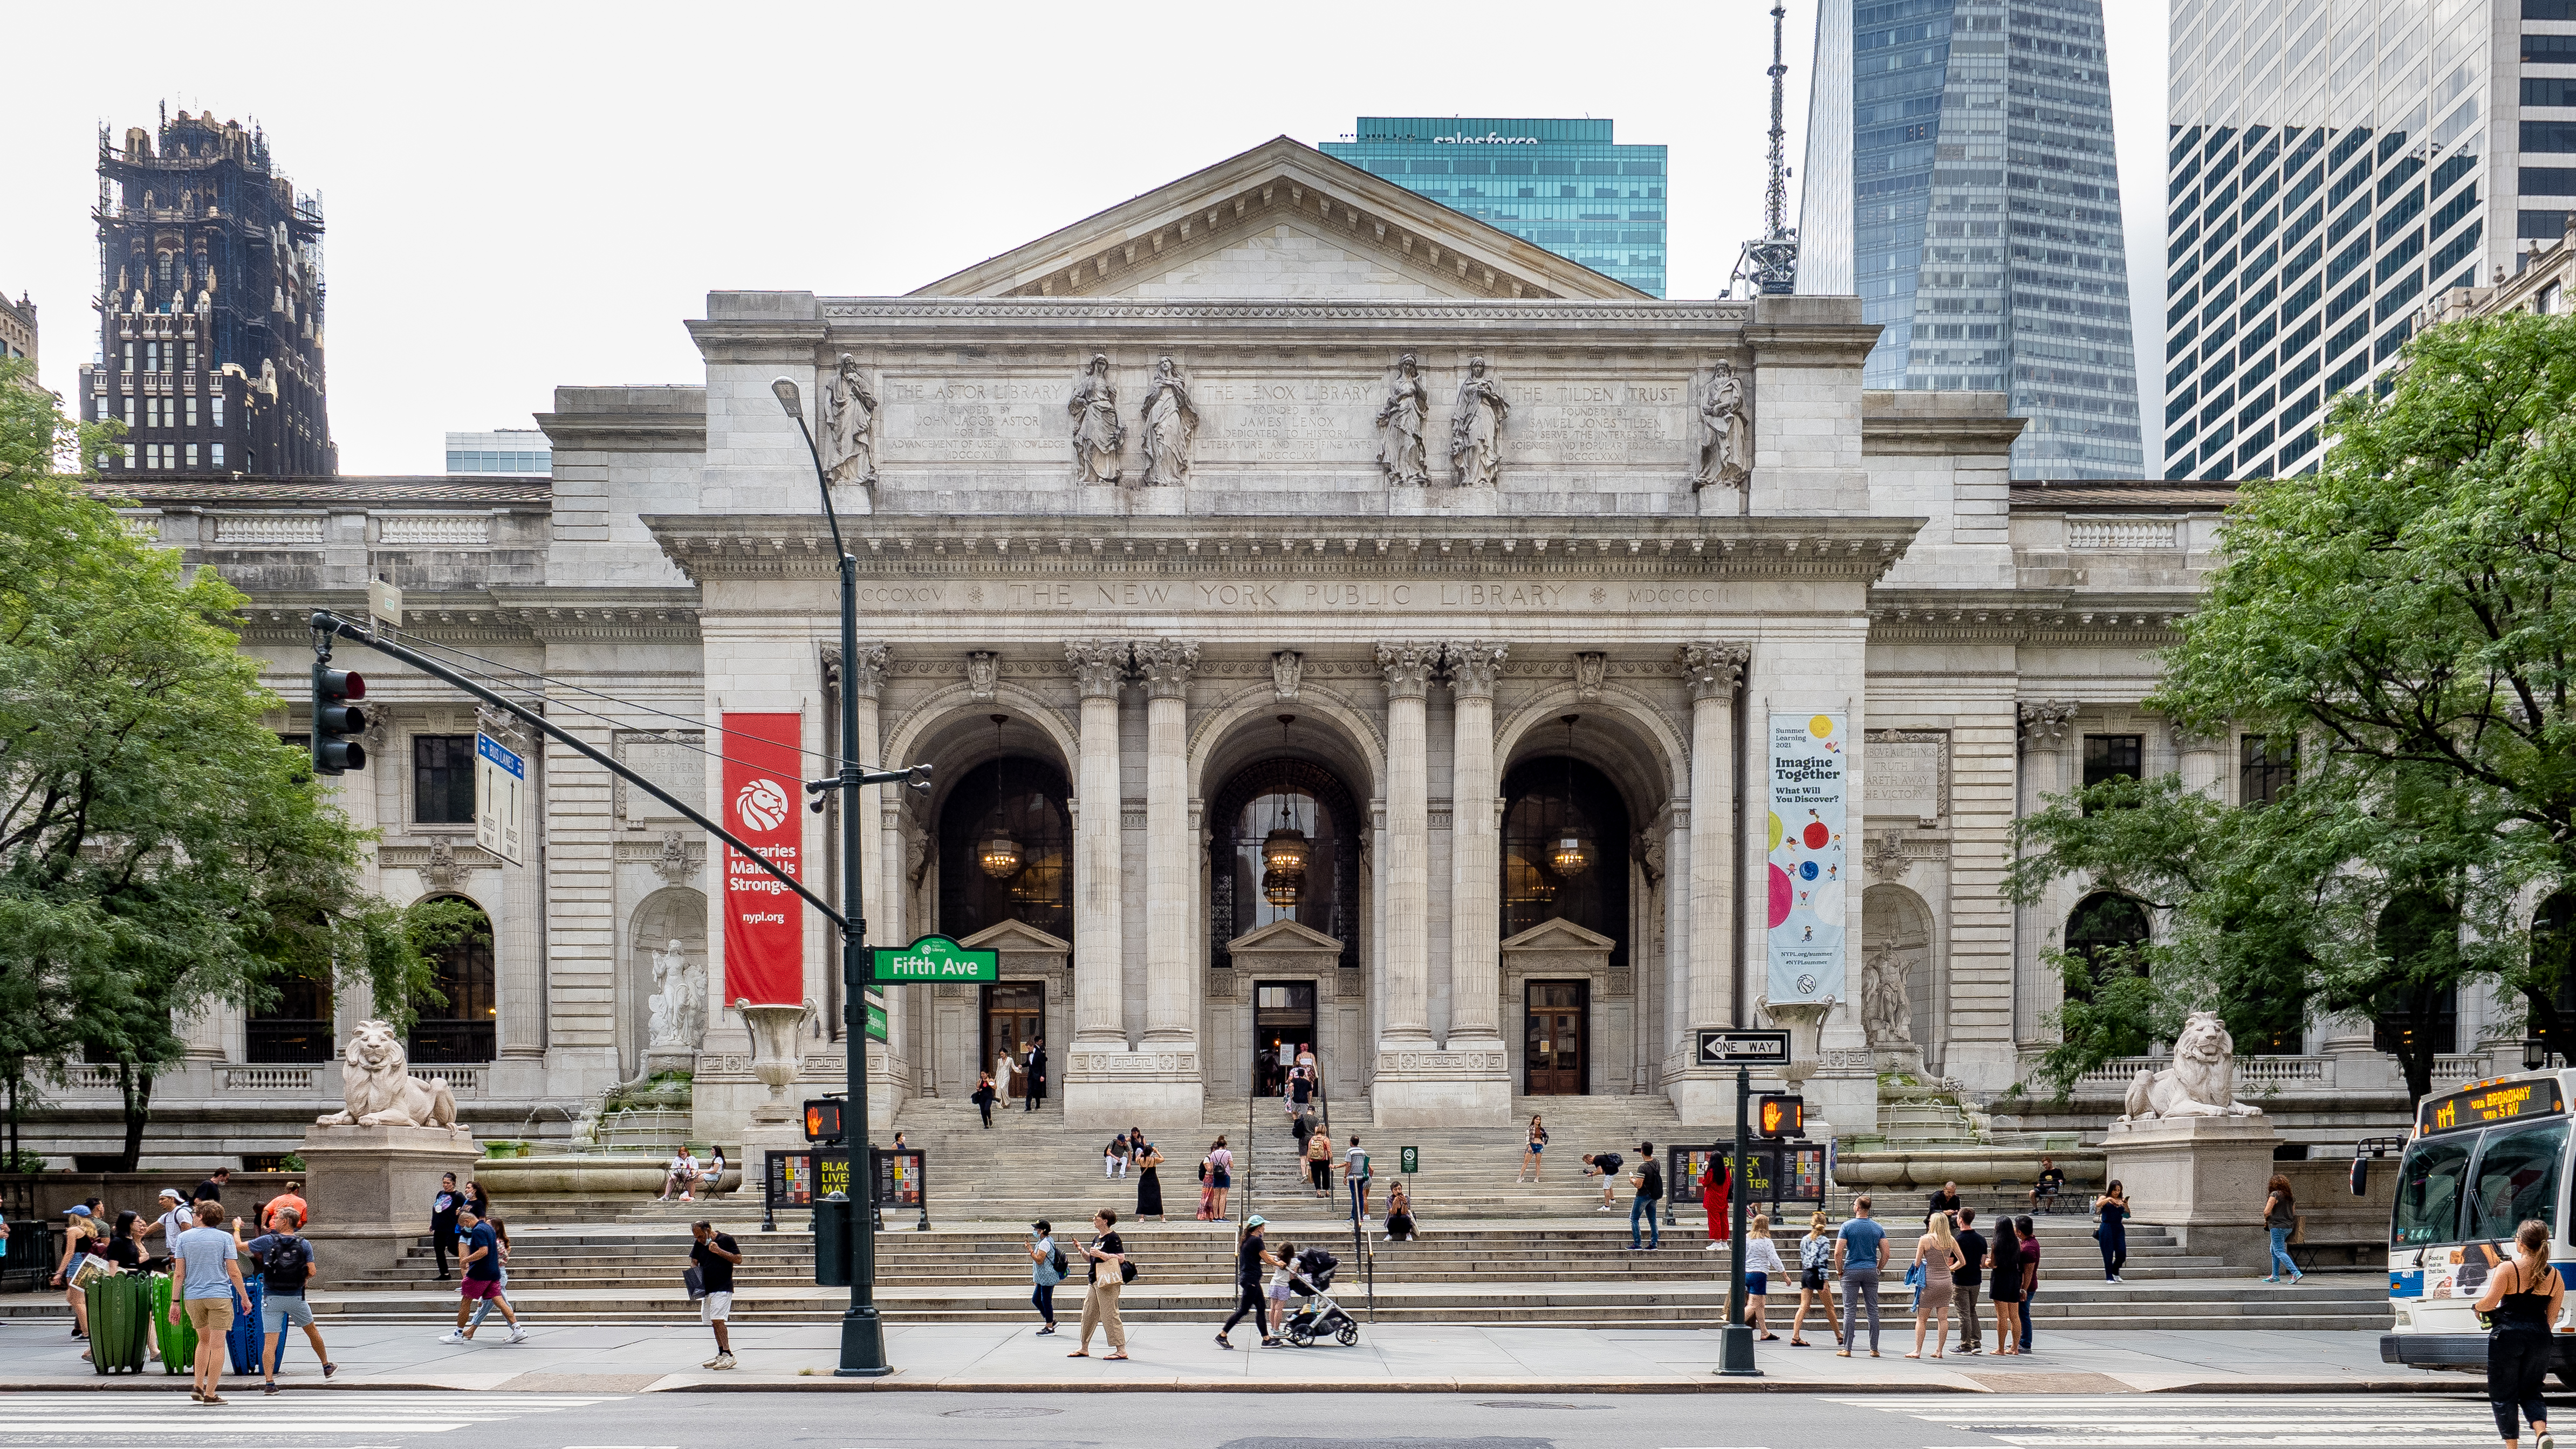 A picture of the front of the New York Public Library's main 5th avenue branch. New York Public Library - Main Branch by ajay_suresh, CC BY 2.0
